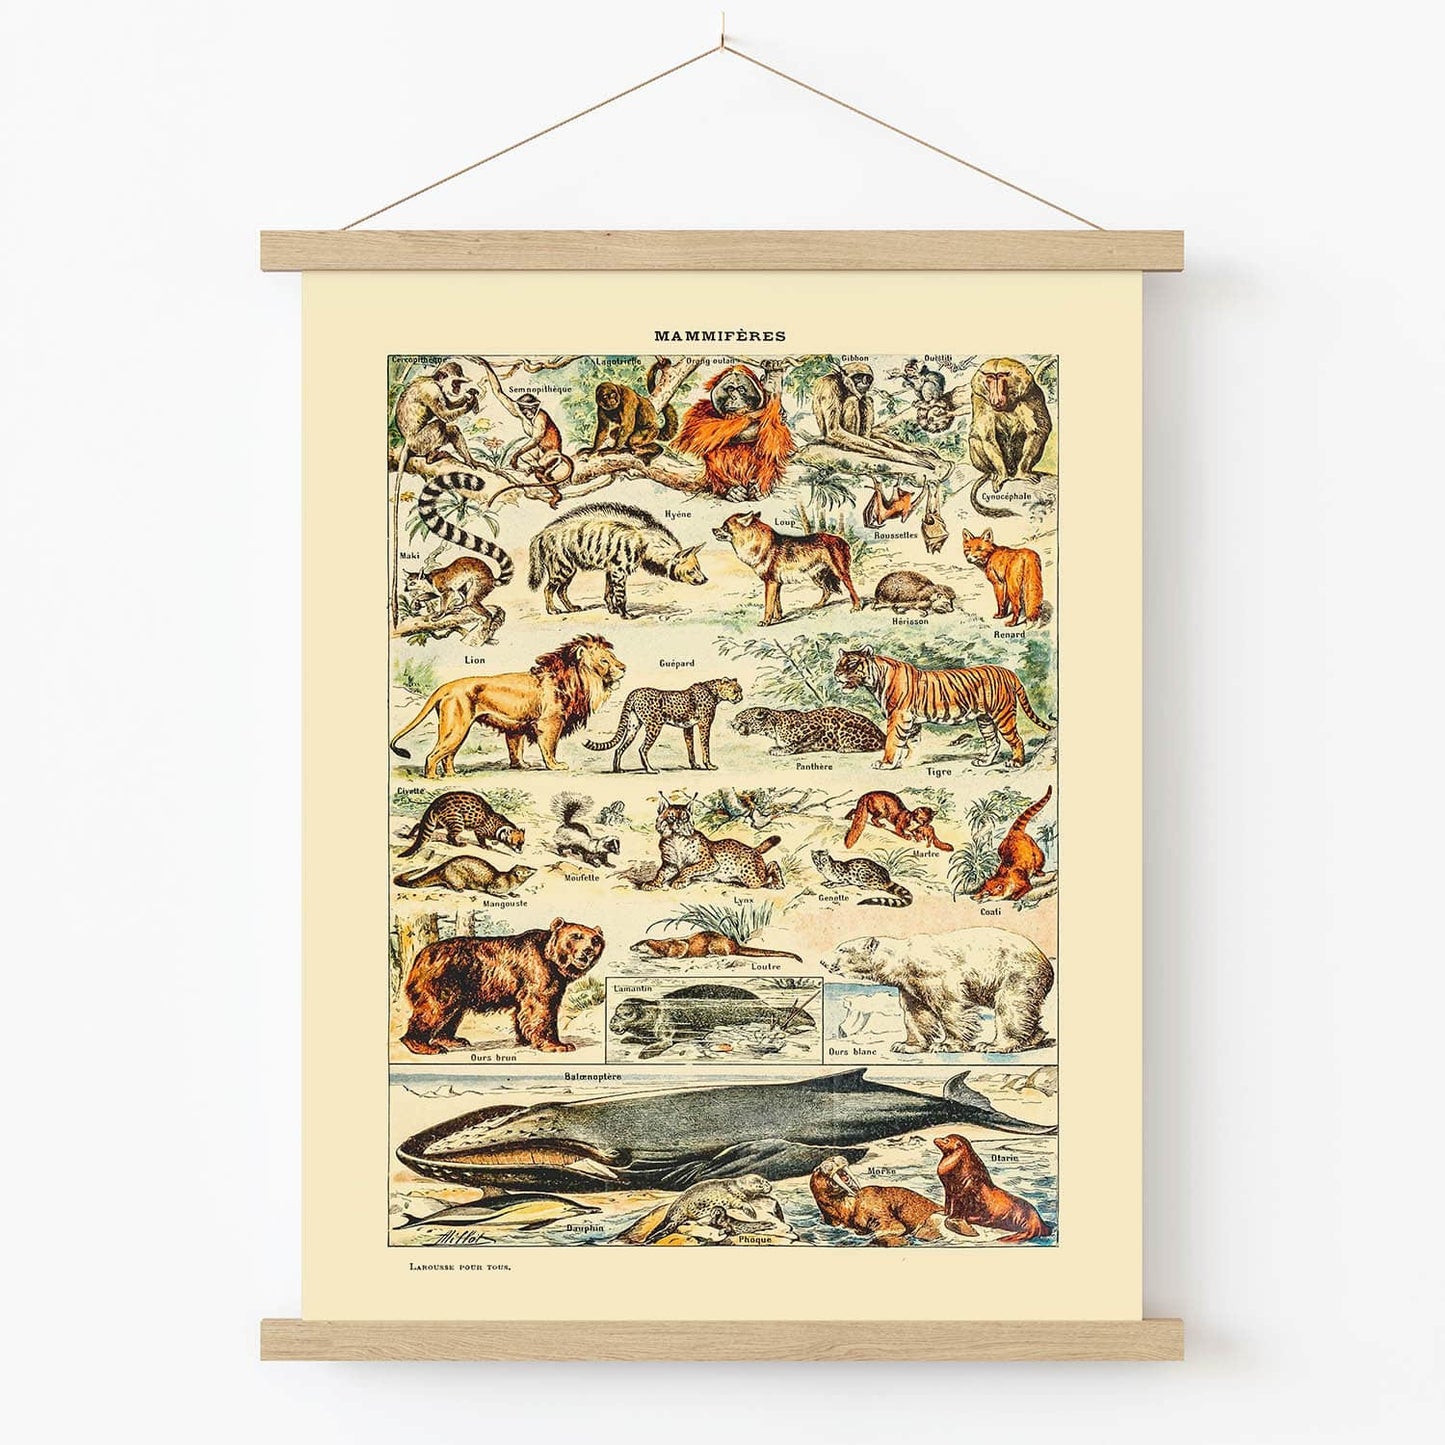 All Sorts of Mammals Art Print in Wood Hanger Frame on Wall